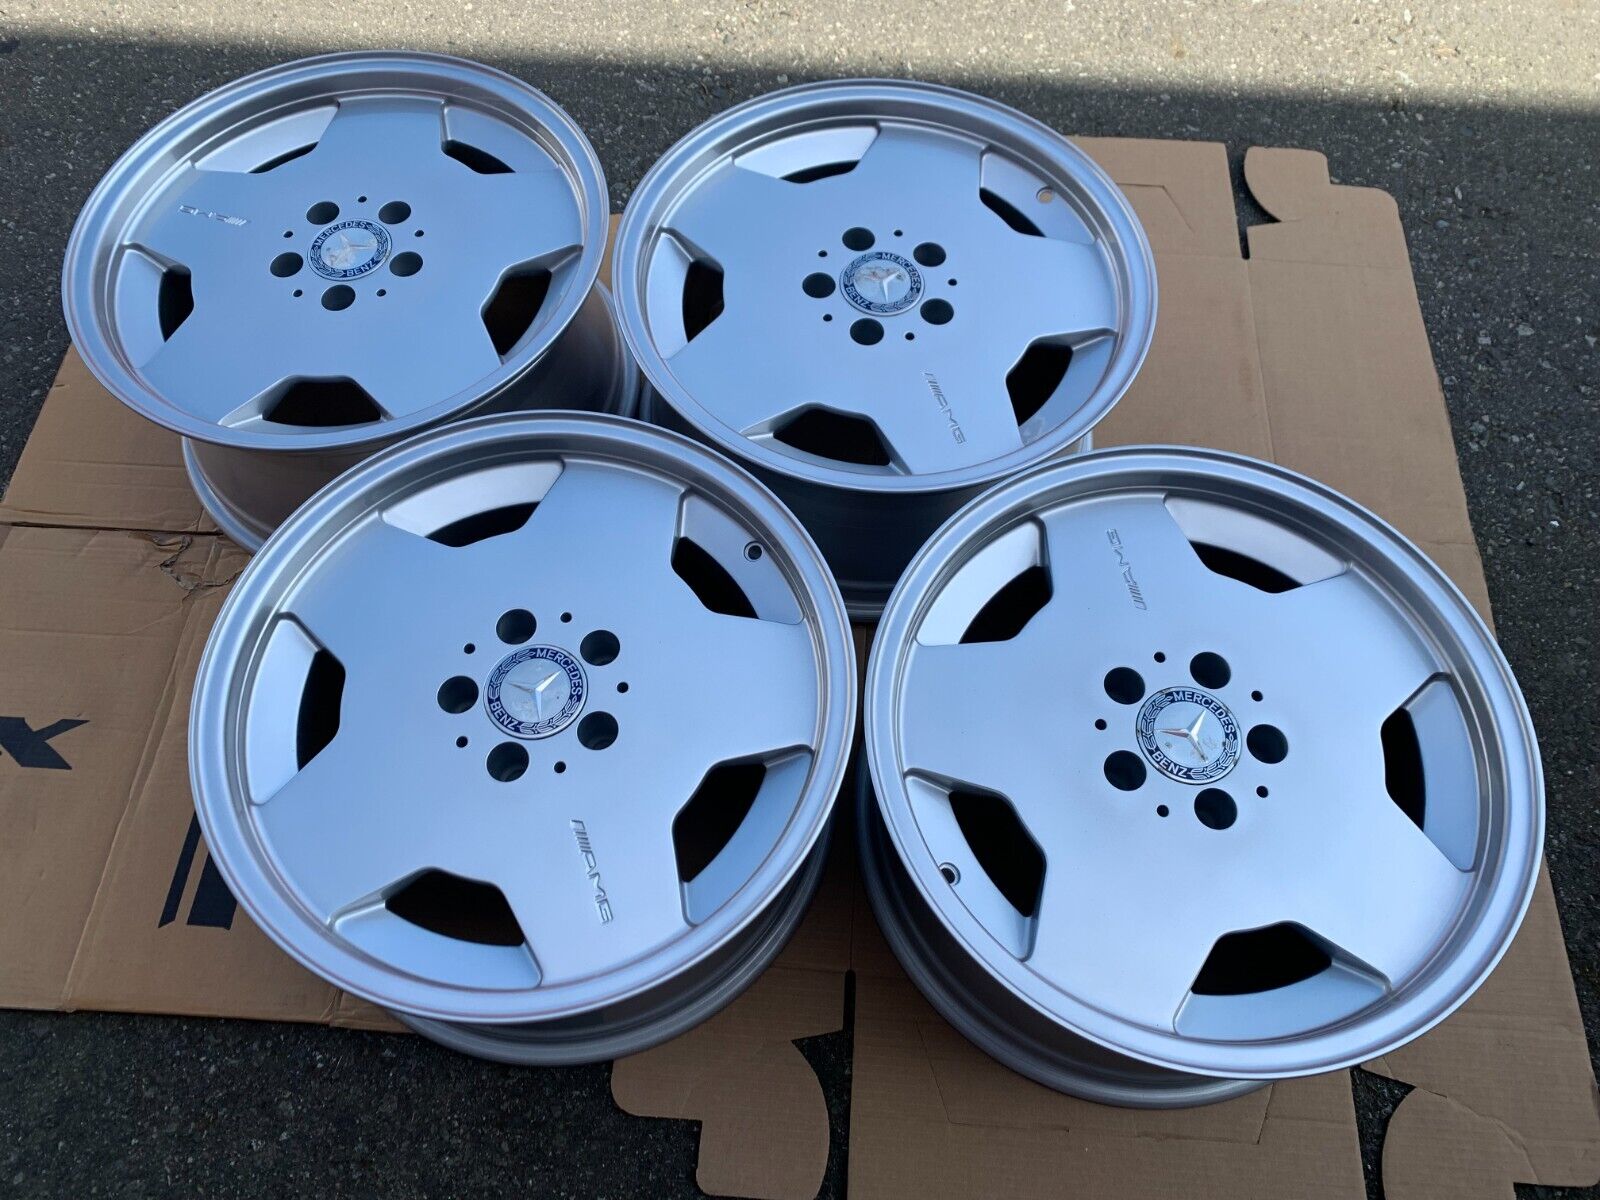 Extremely Rare Set of 17X8 AMG Aero Arrow rims restored with perfection as new